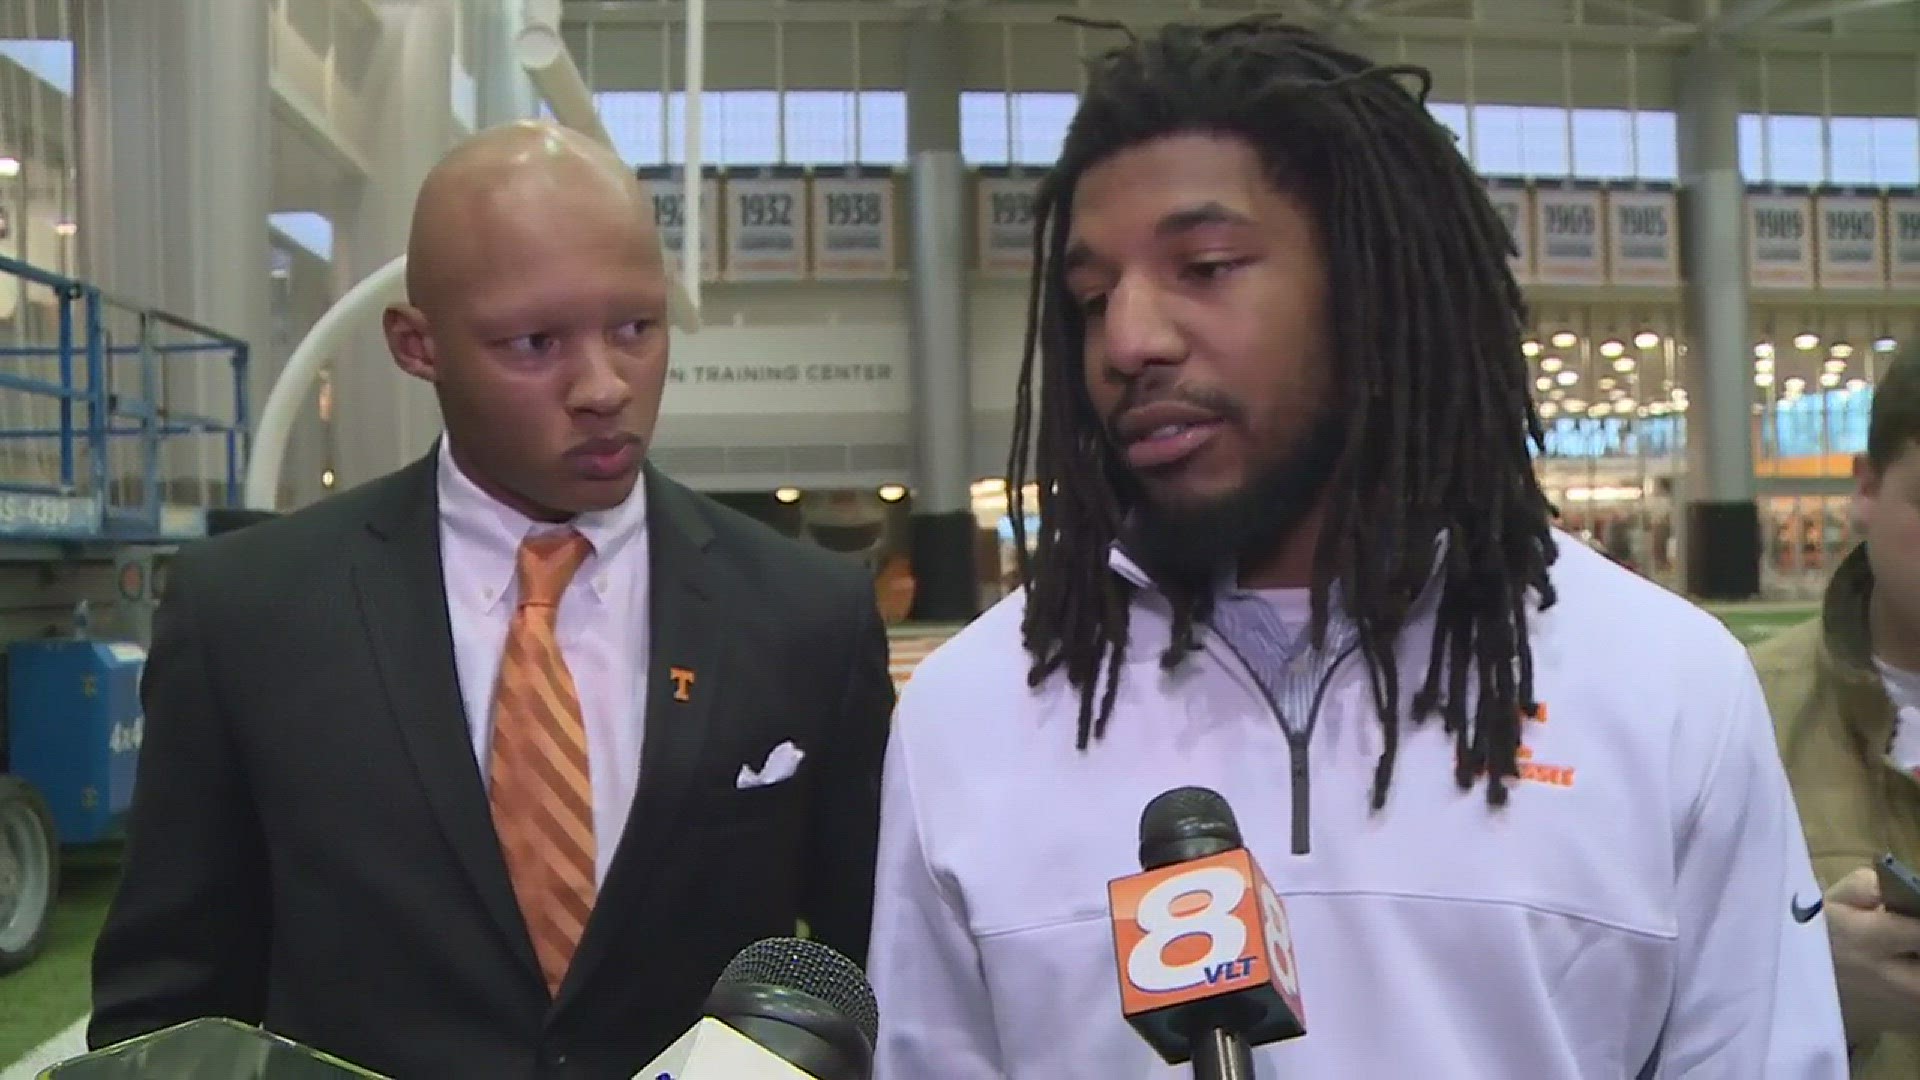 Current Vols LB Curt Maggitt and former OL Kyler Kerbyson discuss allegations made by former Vols WR Drae Bowles